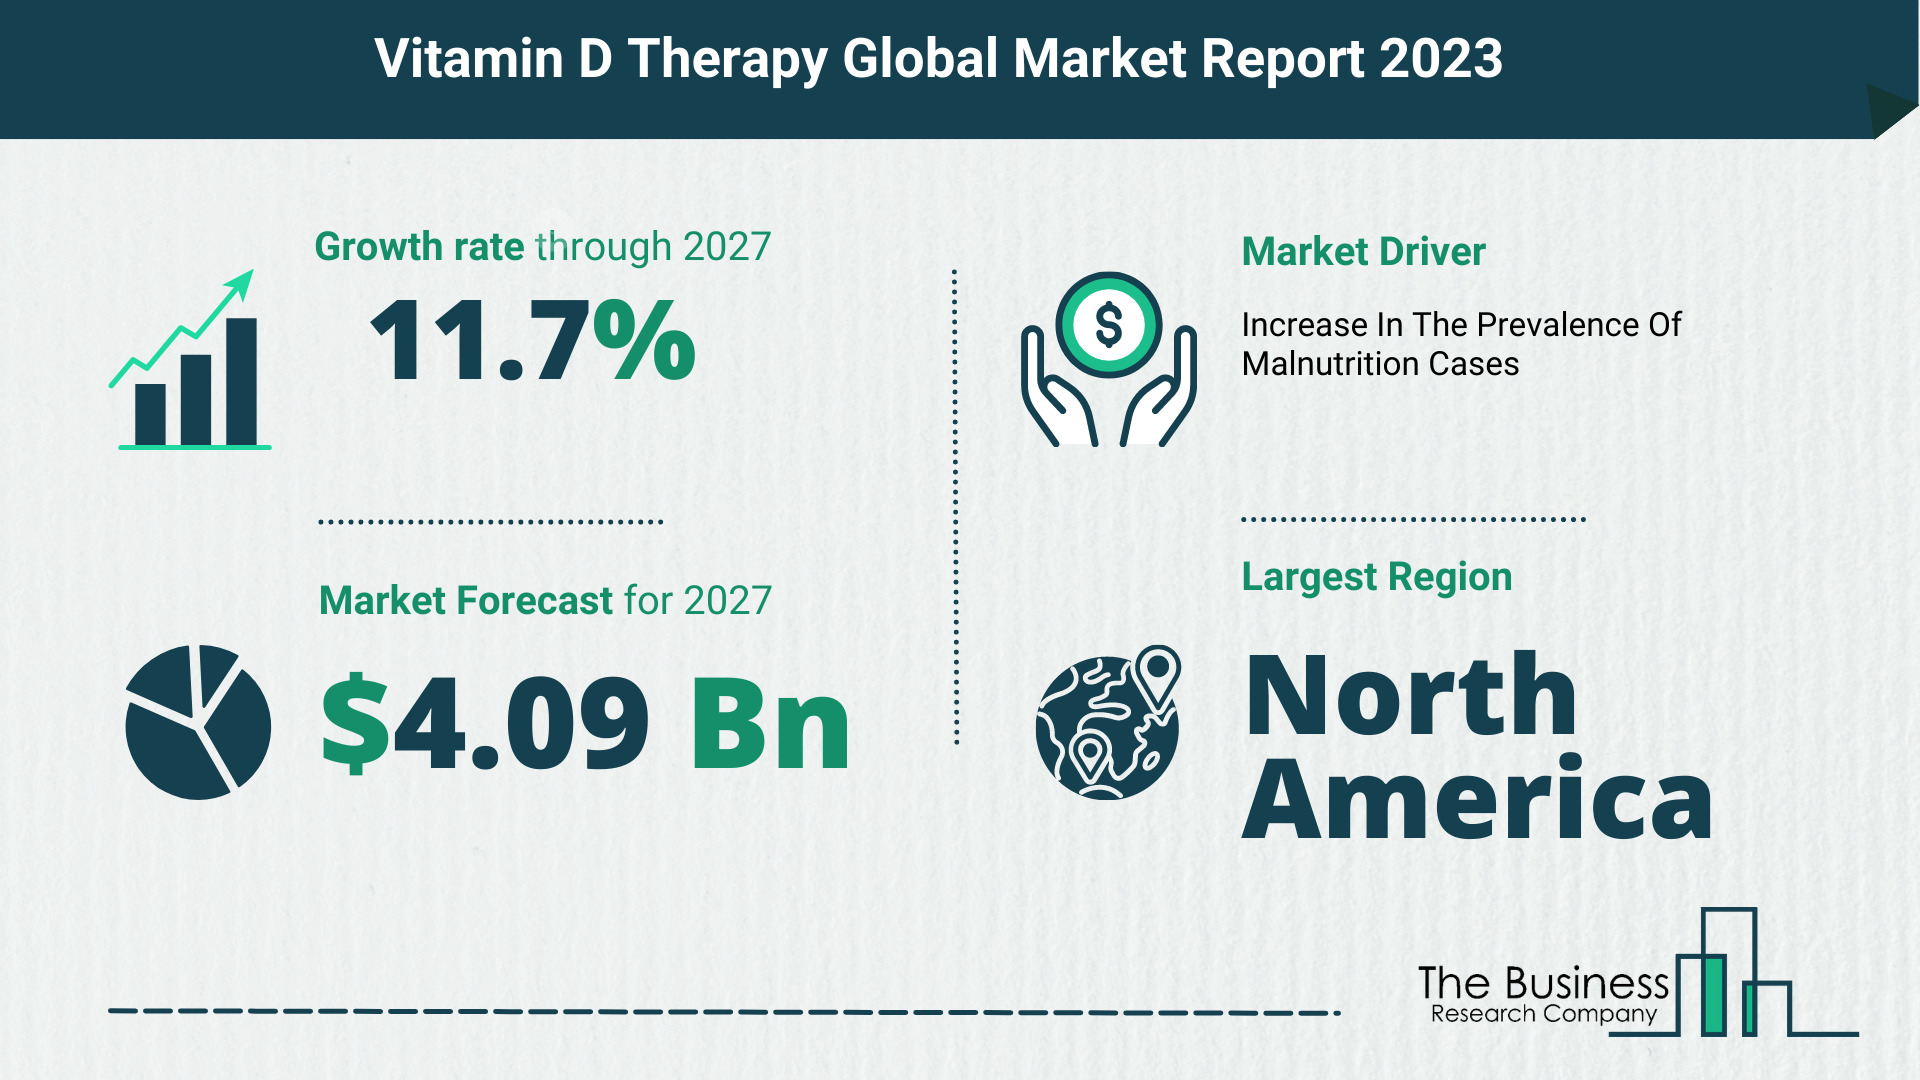 How Will The Vitamin D Therapy Market Globally Expand In 2023?